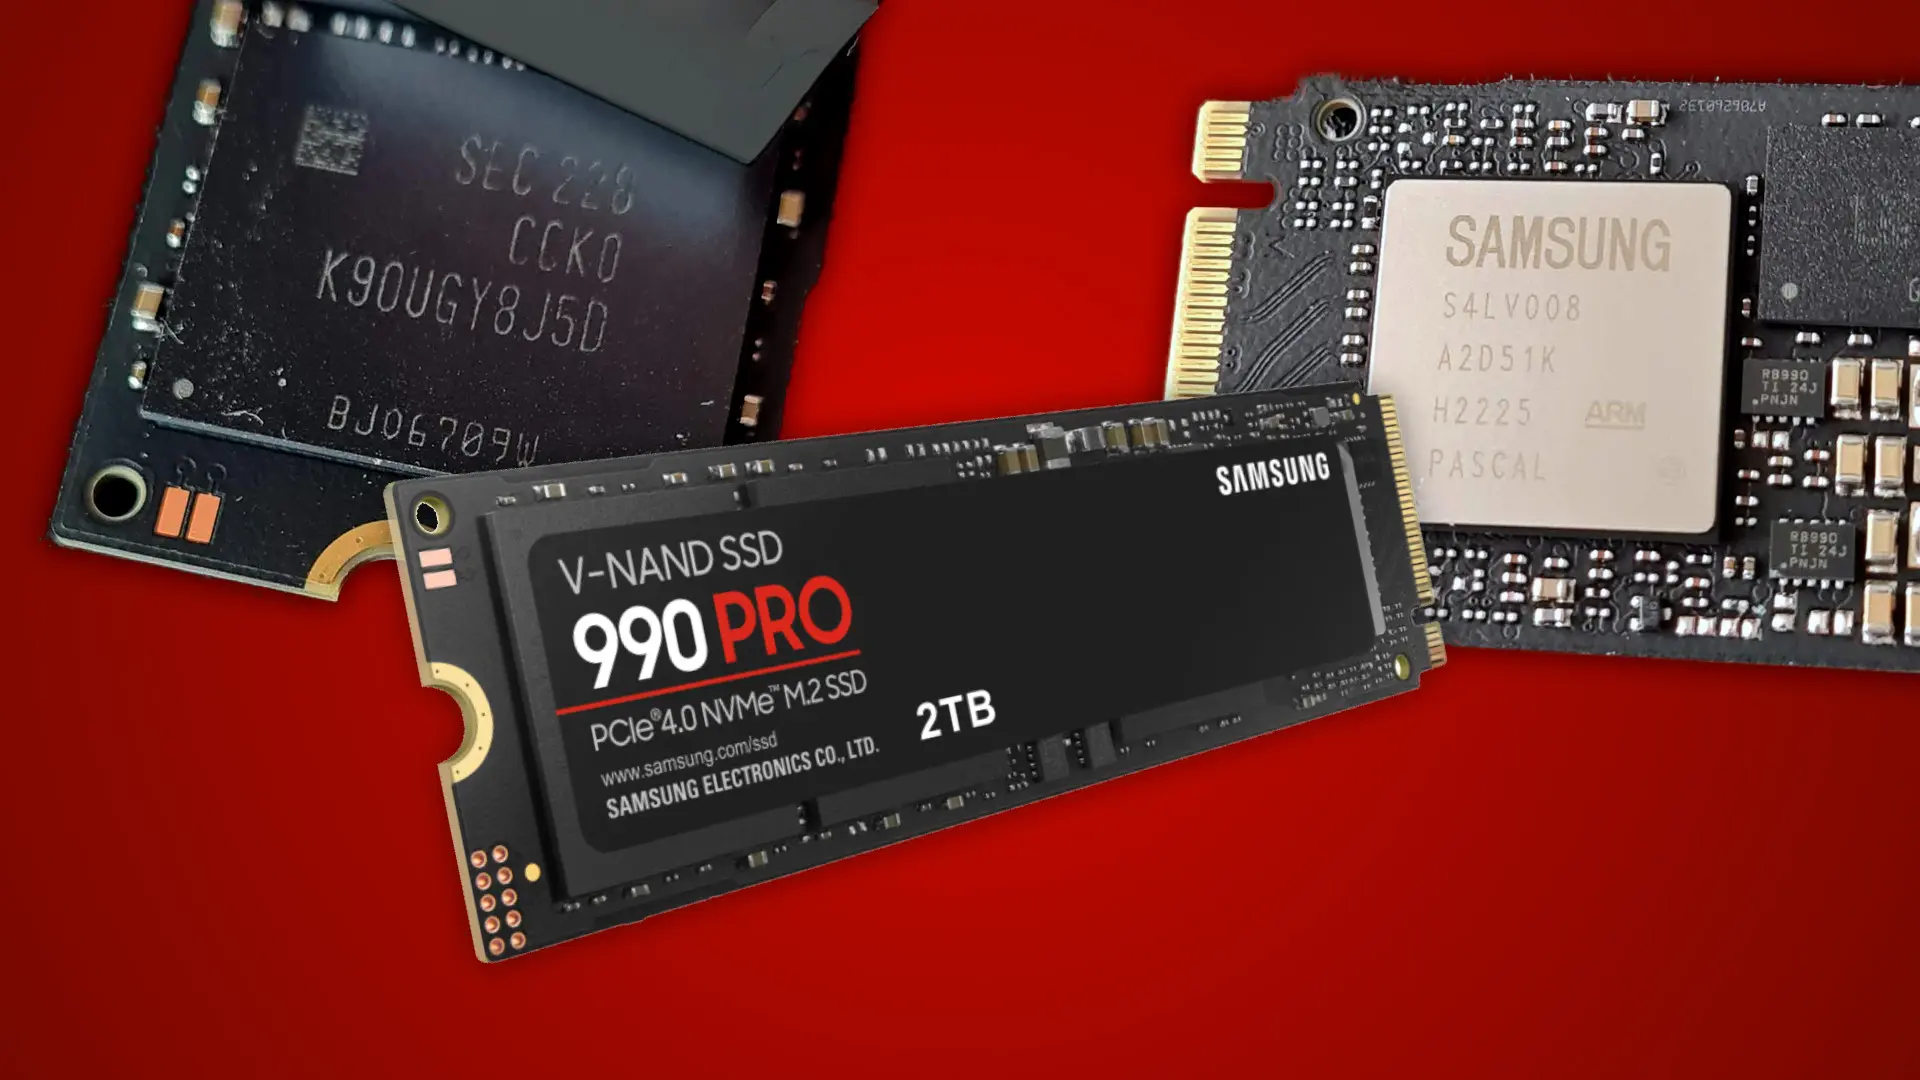 Samsung 980 Pro SSD vs. 990 Pro: A Close Look at the Specs